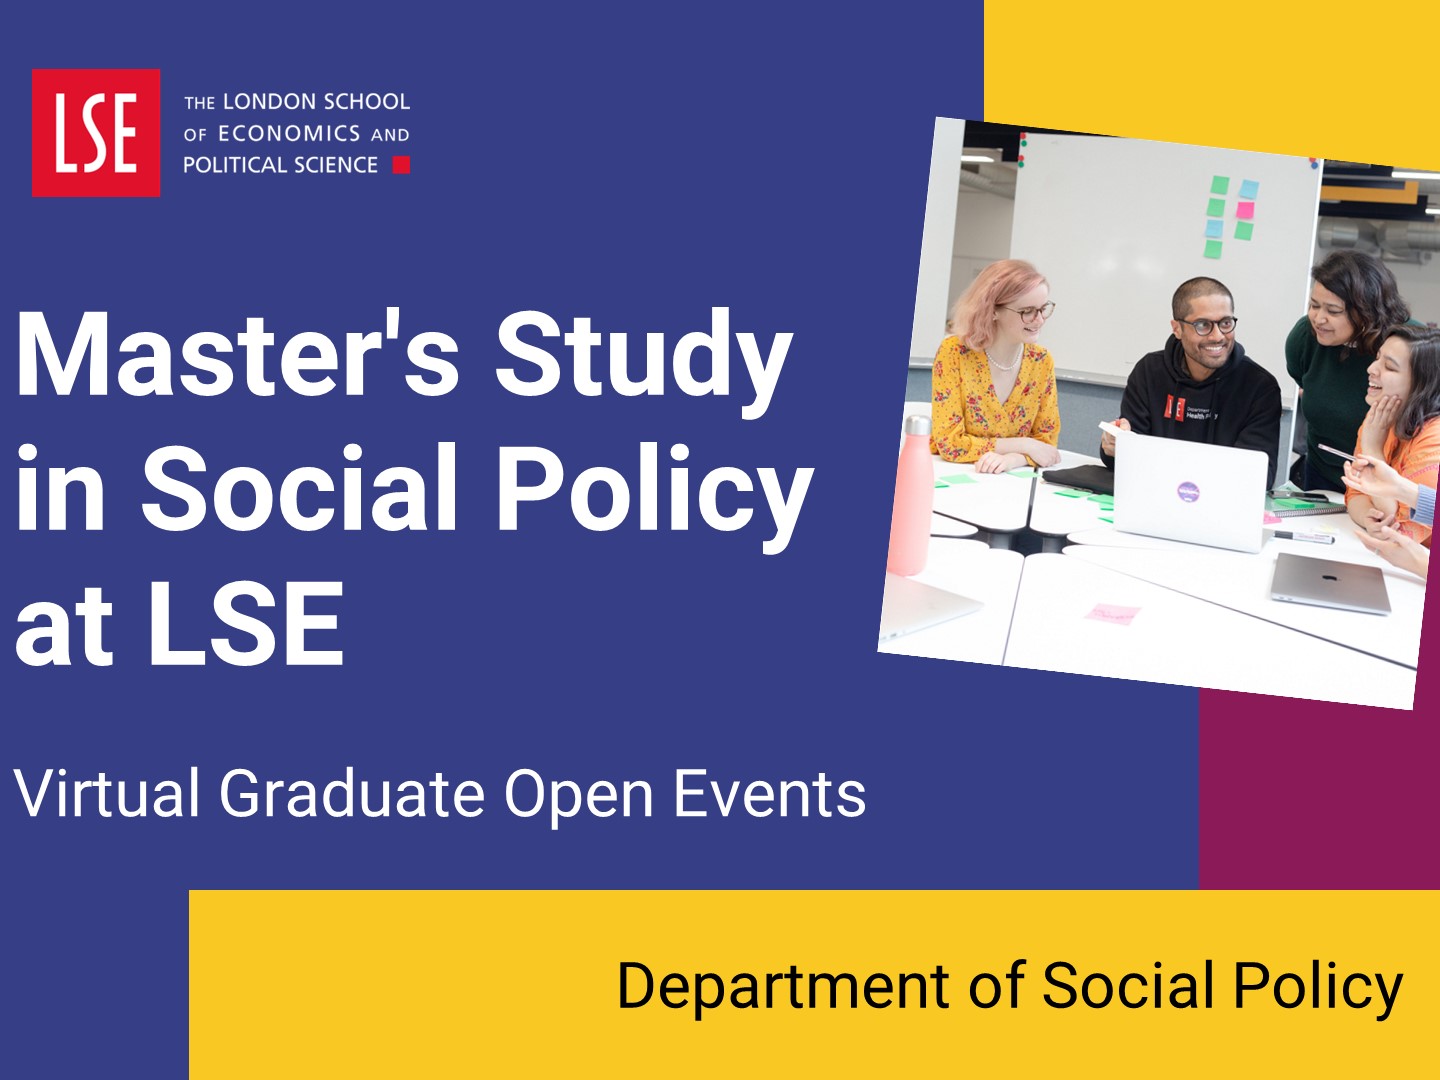 Introduction to master's study in Social Policy at LSE